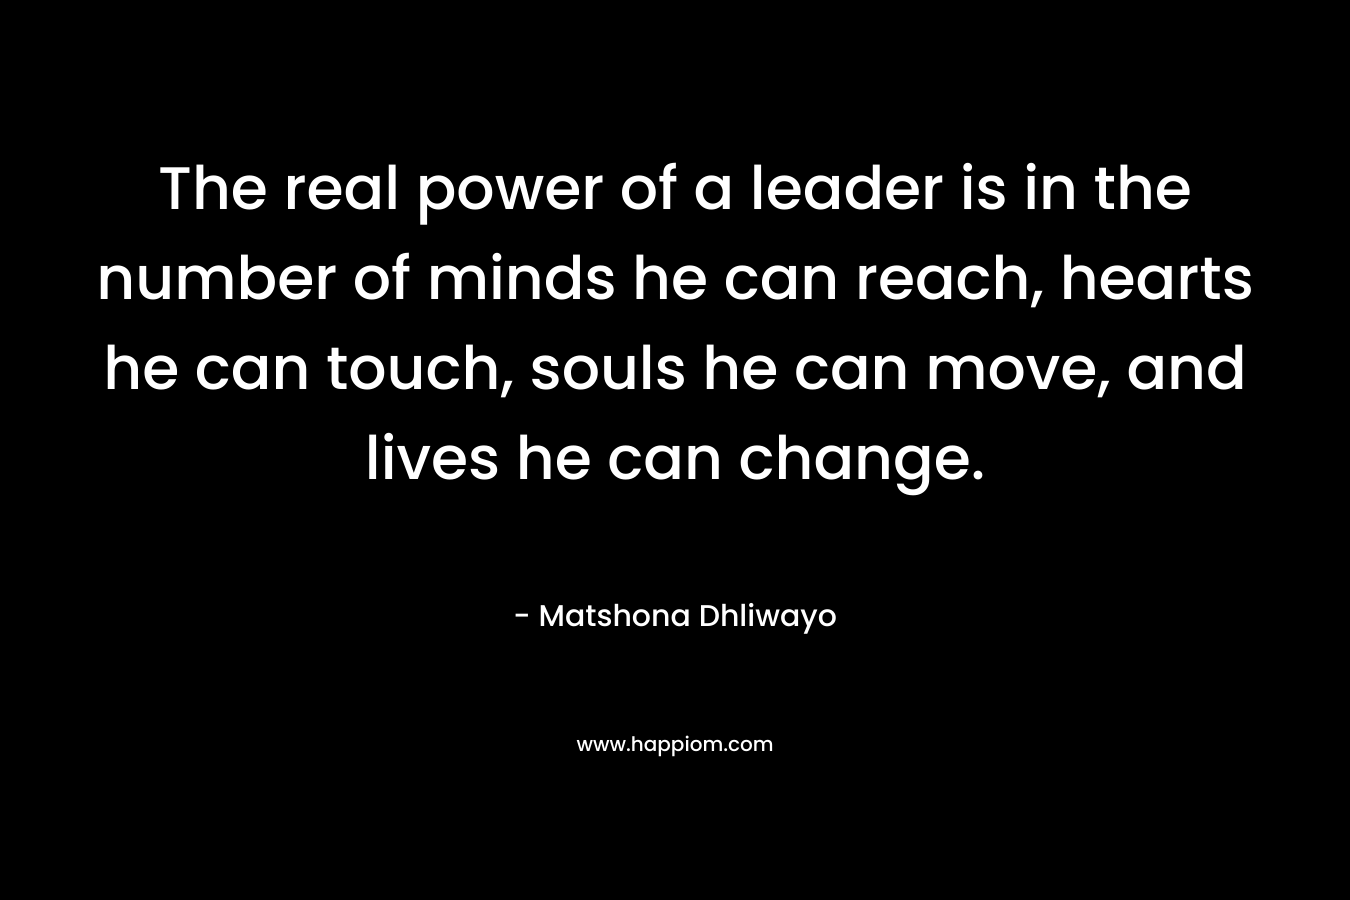 The real power of a leader is in the number of minds he can reach, hearts he can touch, souls he can move, and lives he can change.